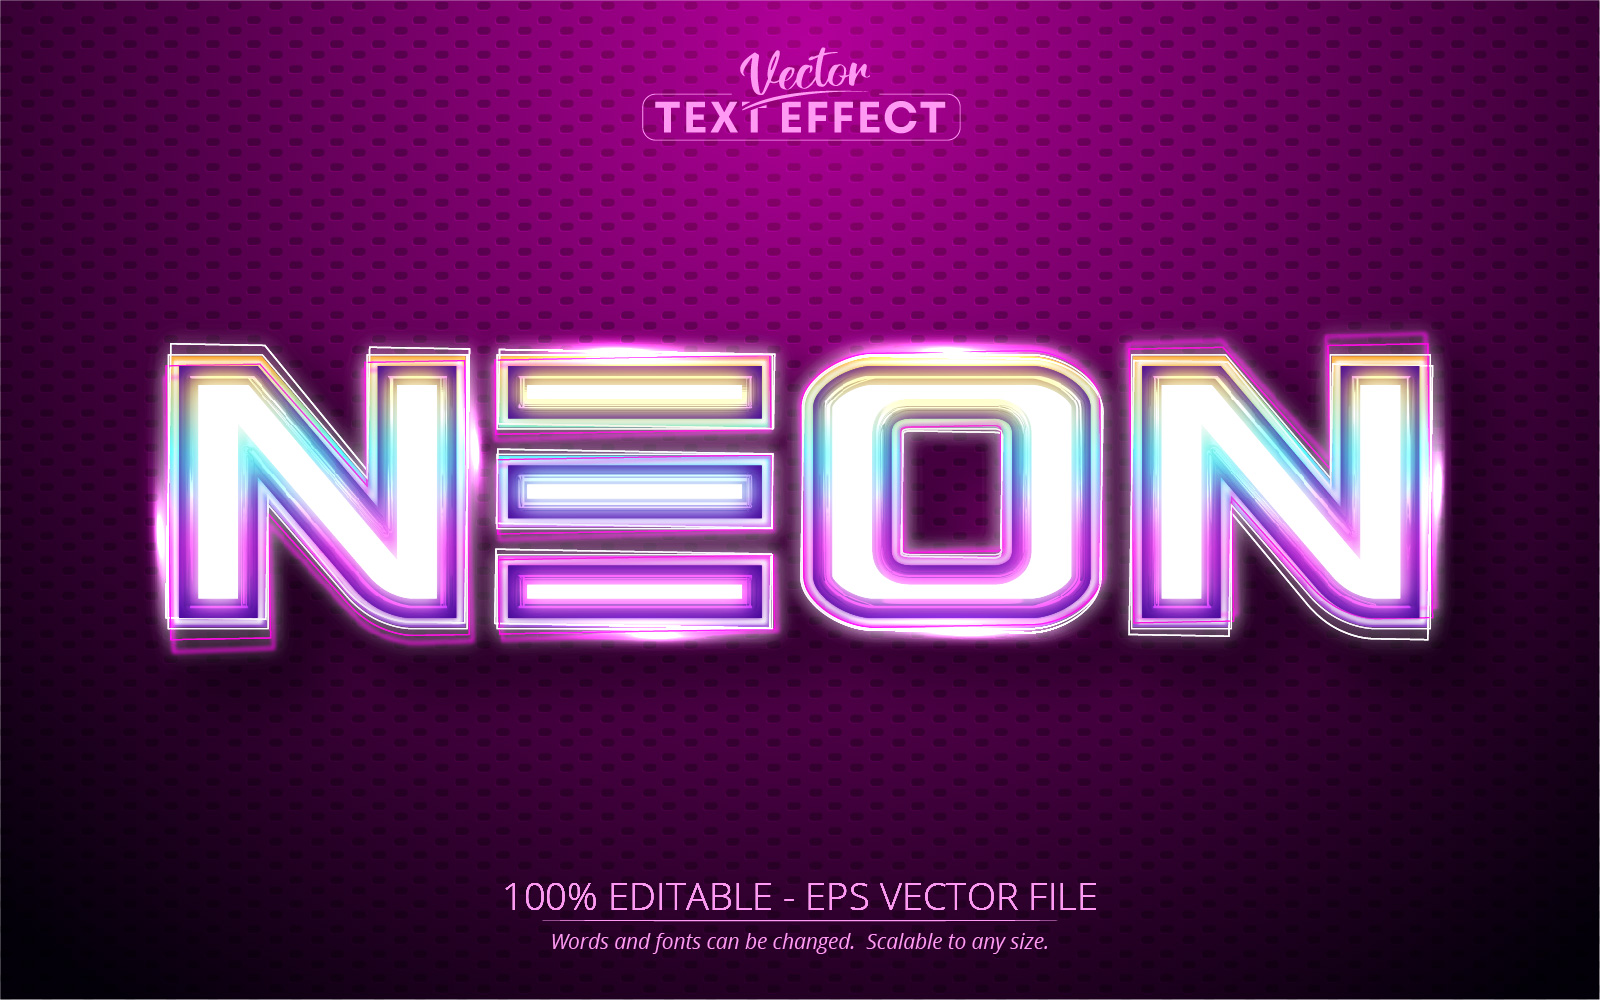 Neon - Editable Text Effect, Neon Glowing Colorful Text Style, Graphics Illustration